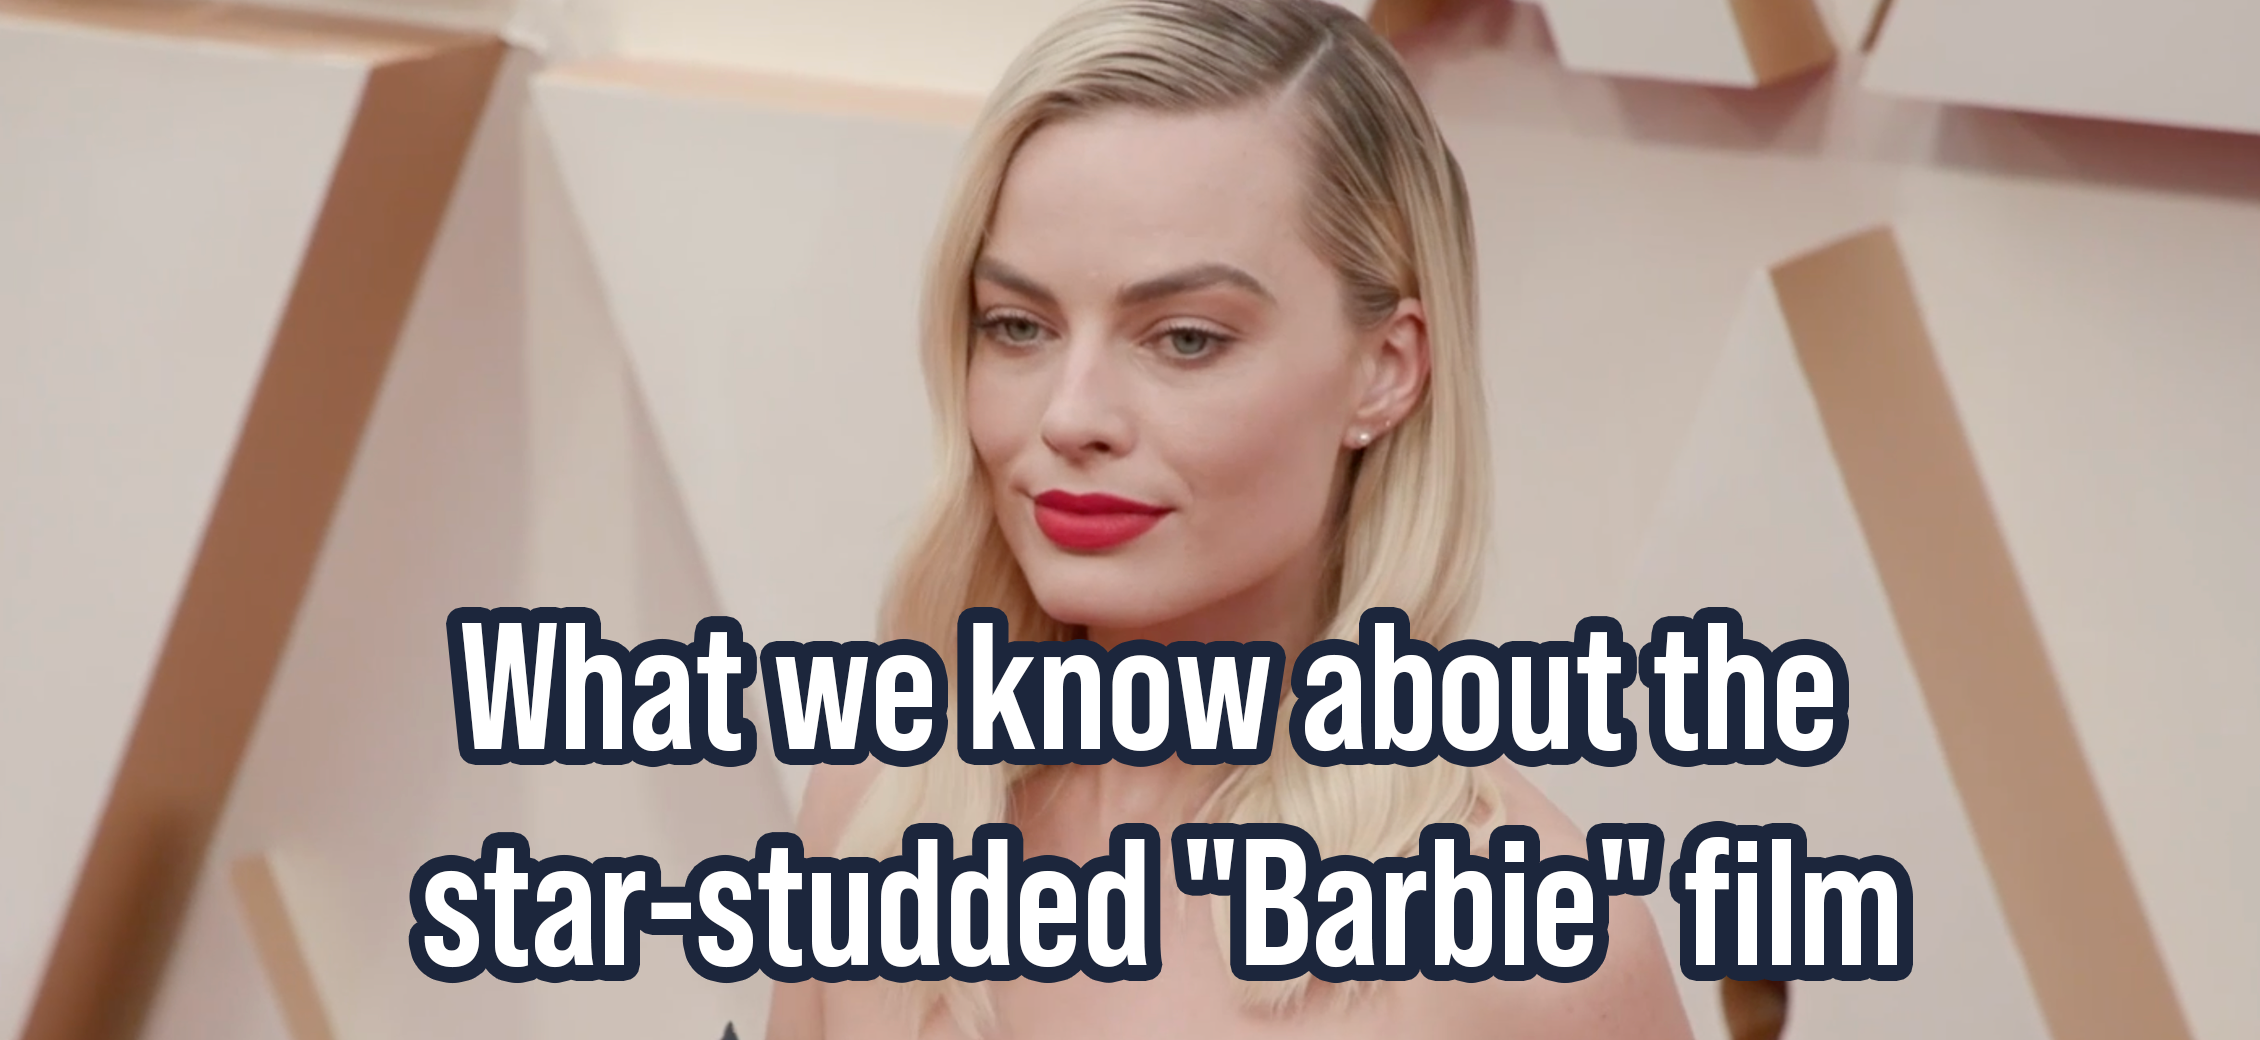 What we know about the star-studded “Barbie” film